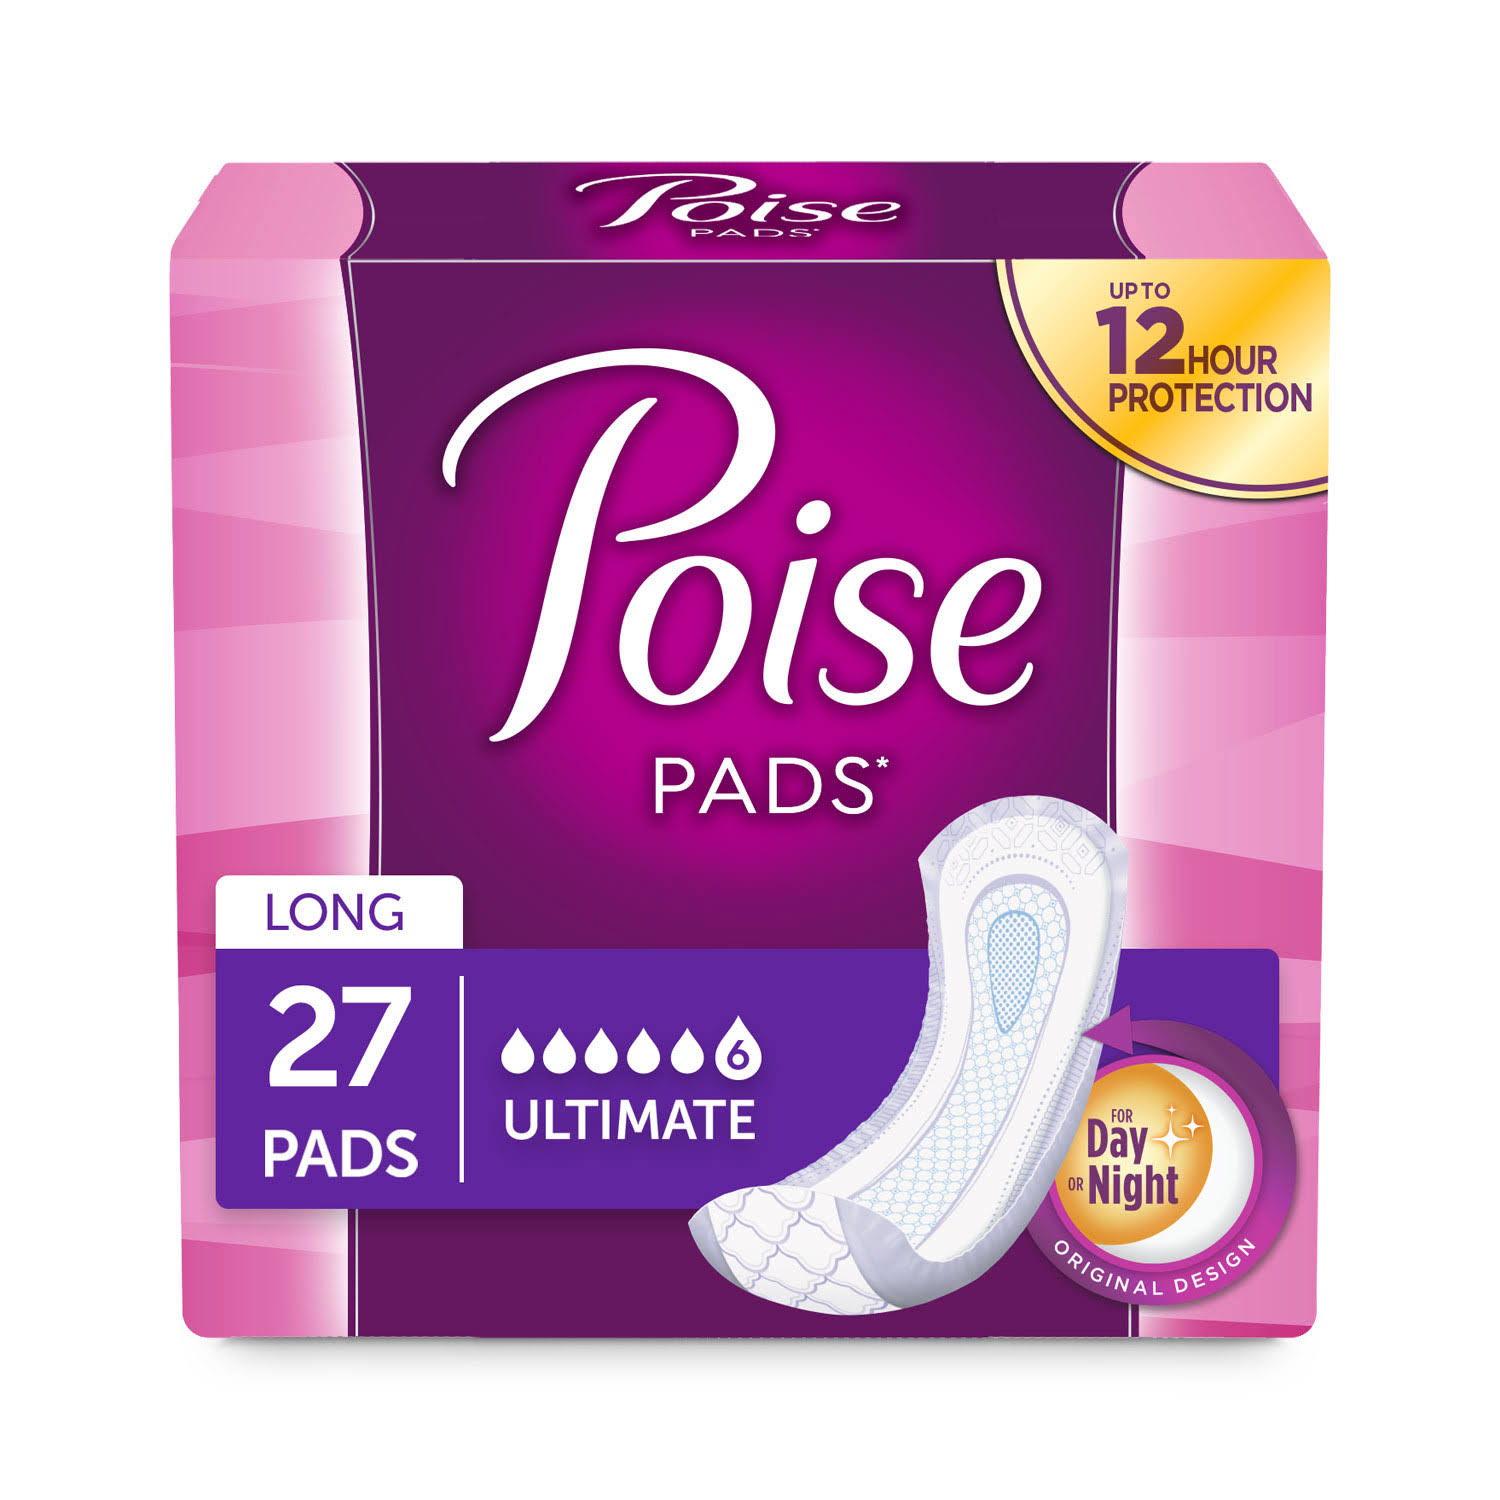 Poise Overnight Pads Long Length Pads - 27 Pads